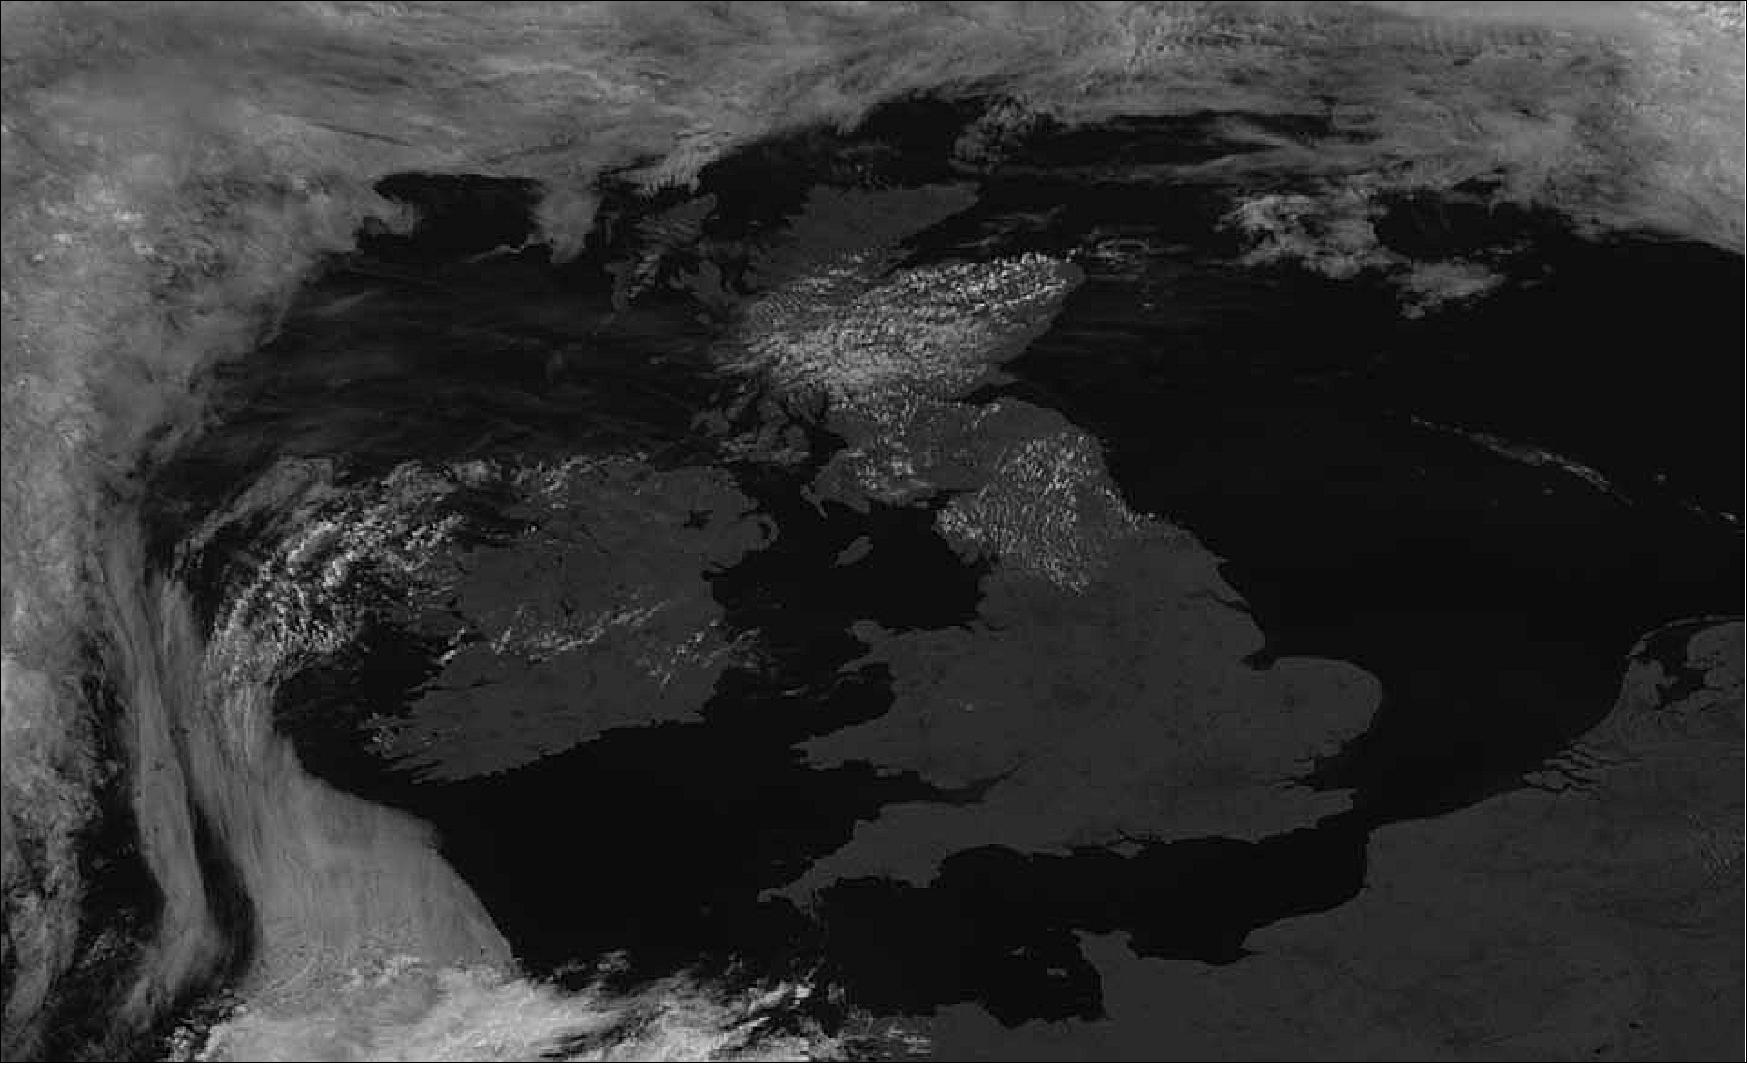 Figure 13: SEVIRI HRV image of Meteosat-10 on July 19, 2016 showing mainly clear skies over the UK and Ireland. In this HRV image, small convective clouds can be seen over northern England and Scotland (image credit: EUMETSAT)